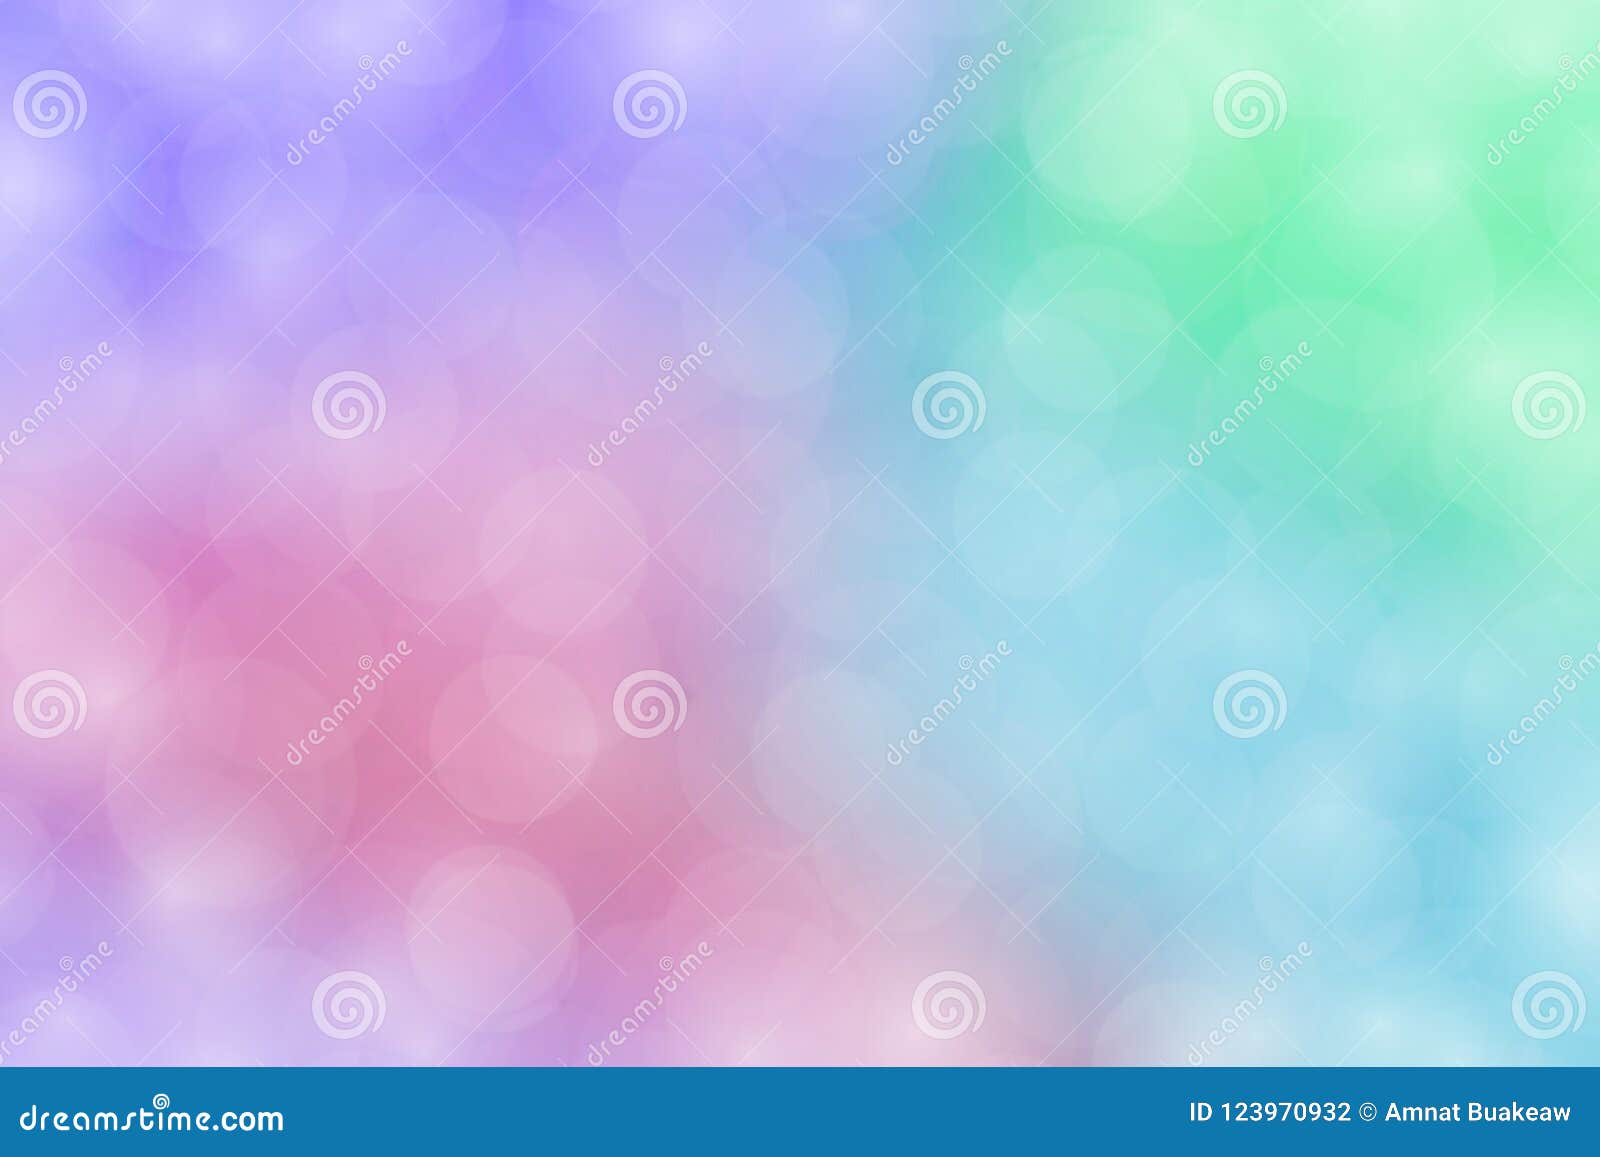 Blurred Soft Green Gradient Colorful Light Shade Background Stock Photo -  Image of elegant, christmas: 123970932